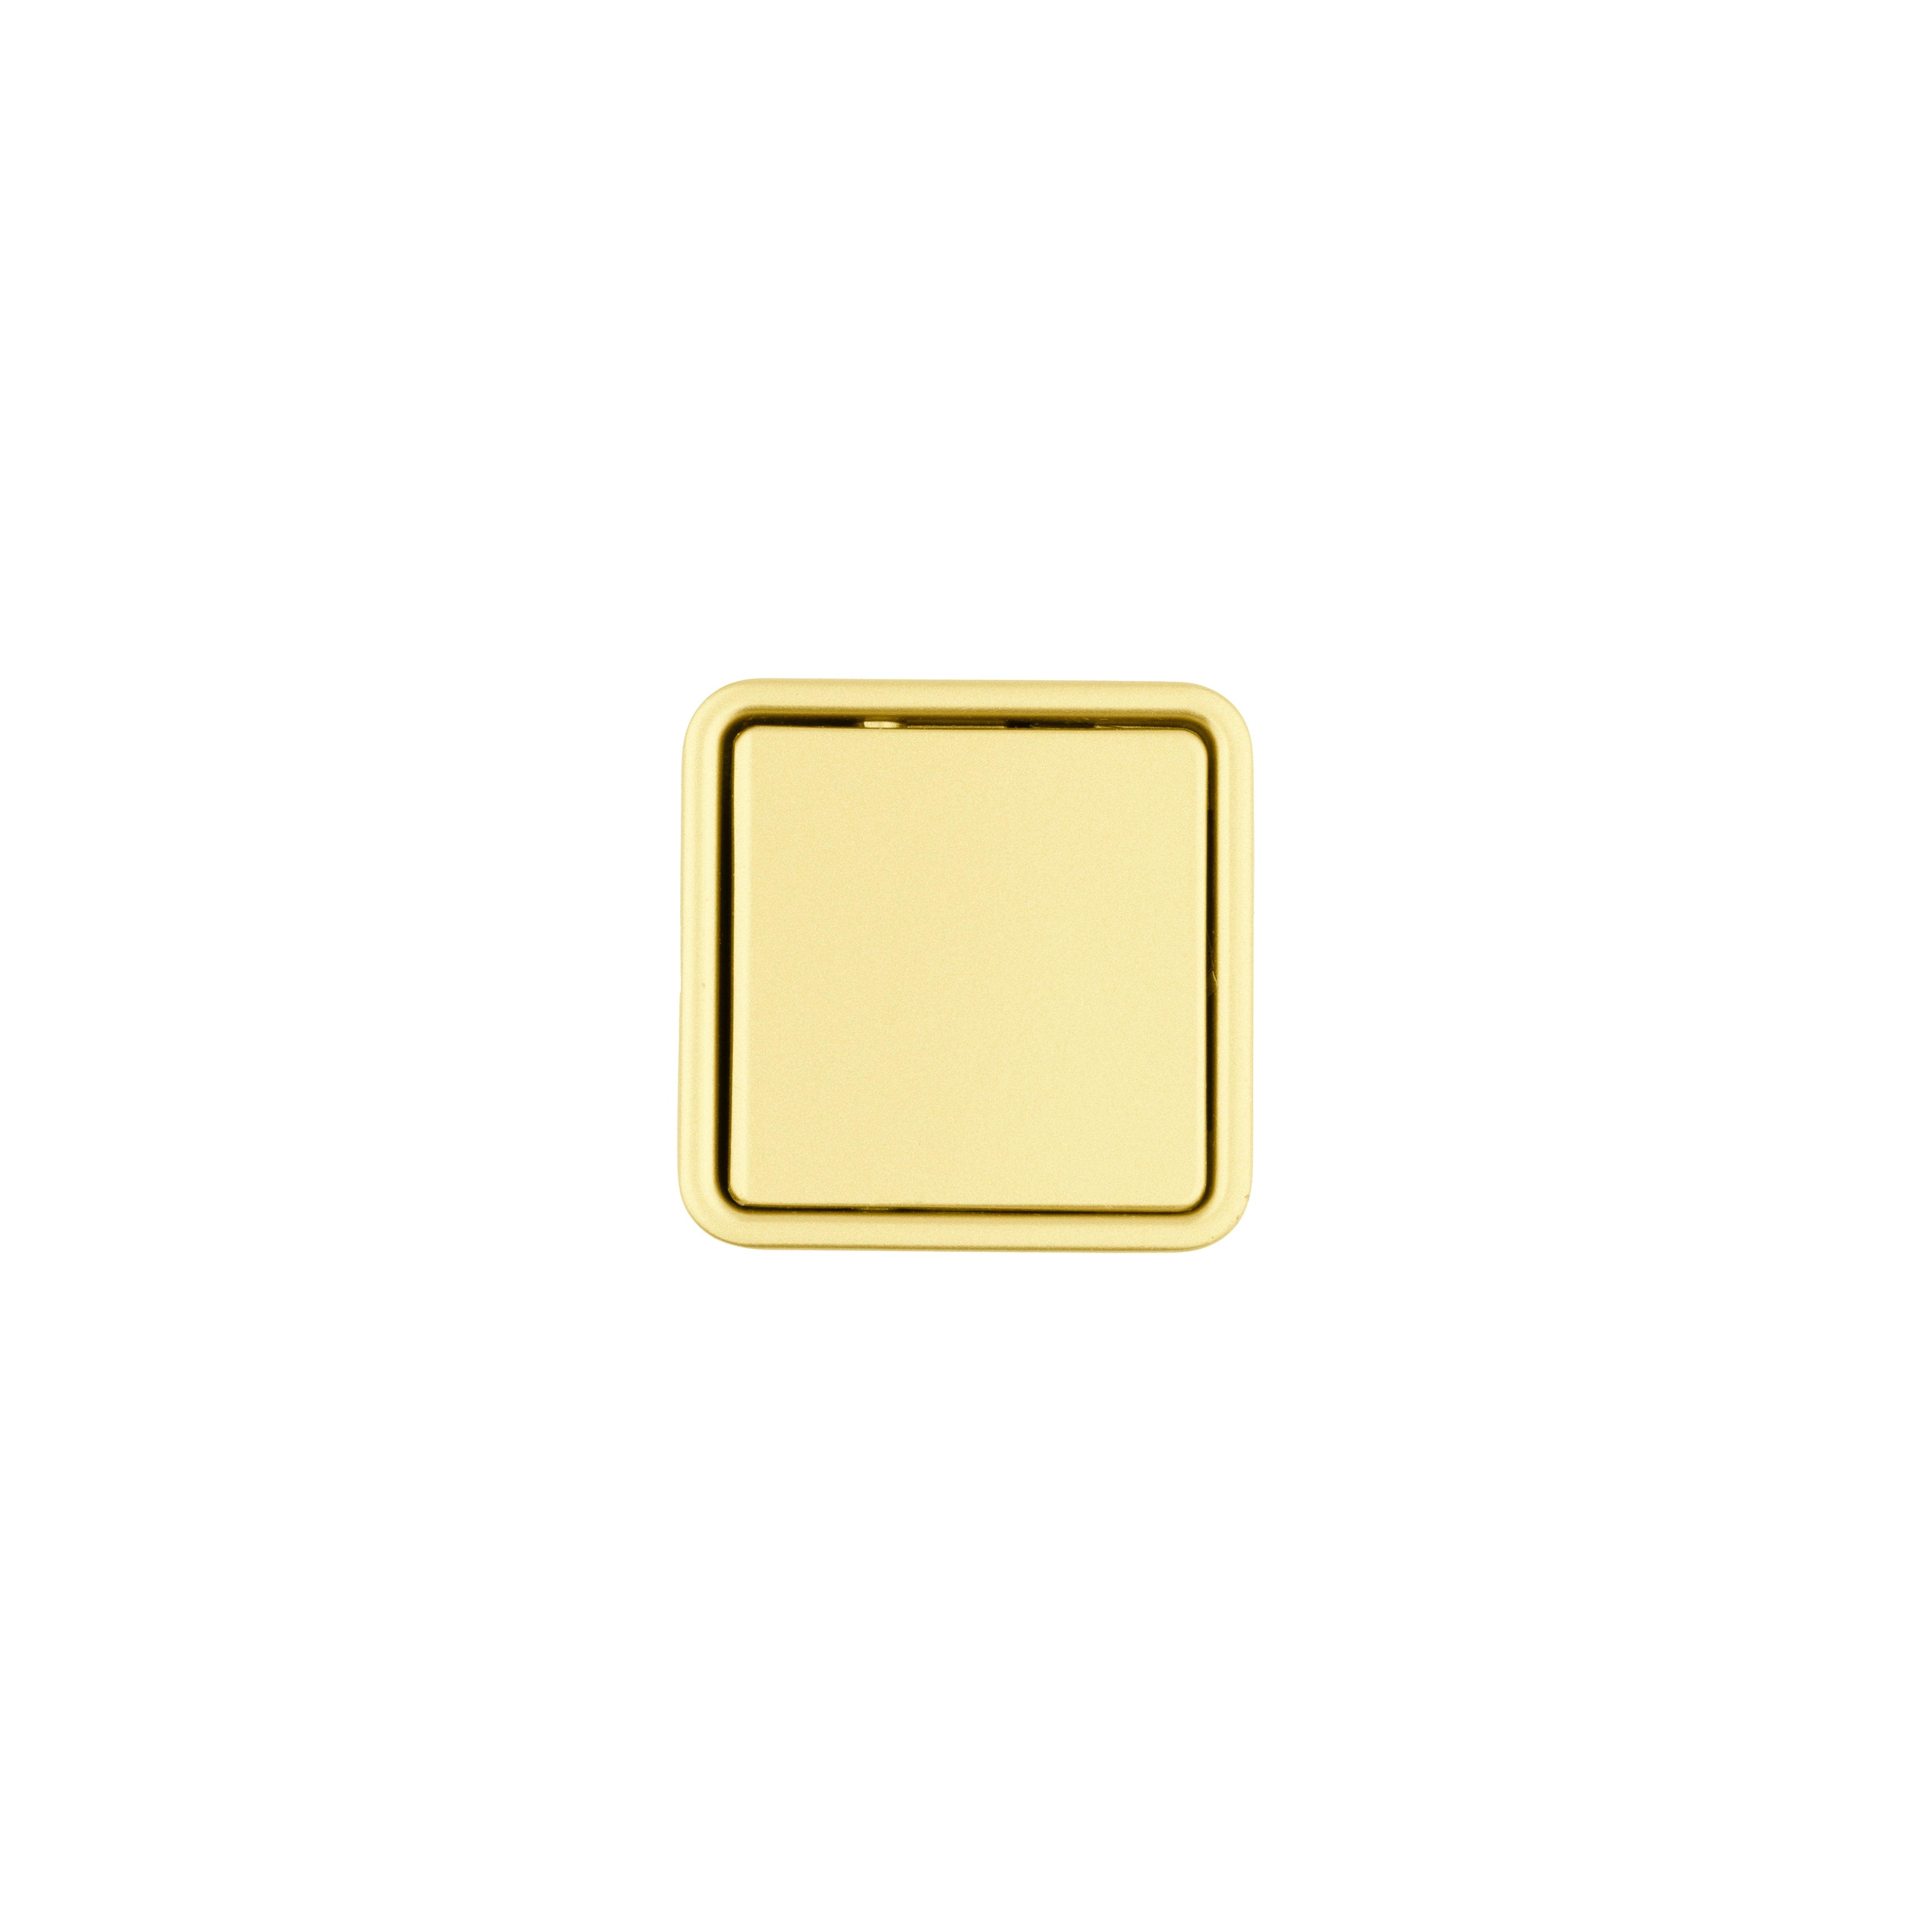 Concealed Square Handle Knob 45mm / Gold - M A N T A R A